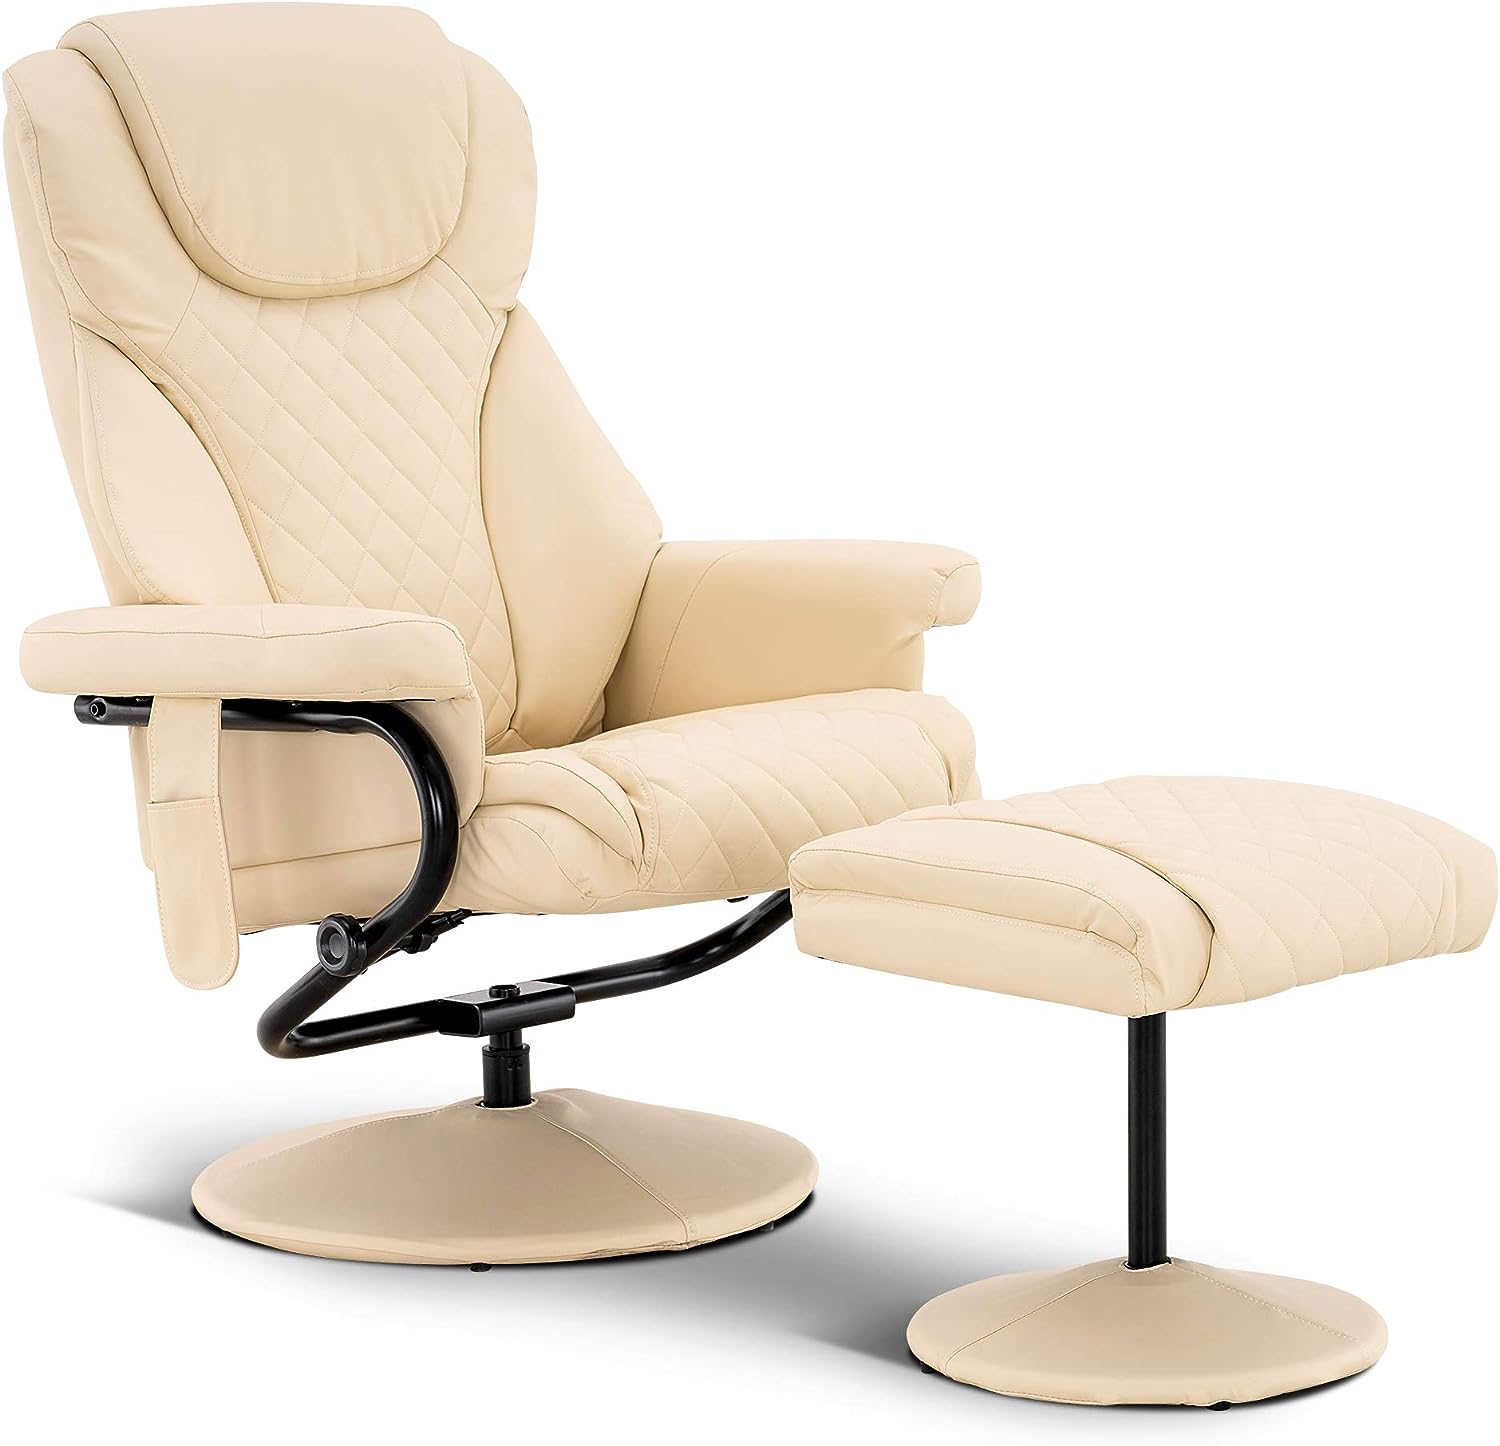 MCombo Recliner with Ottoman, Reclining Chair with [...]